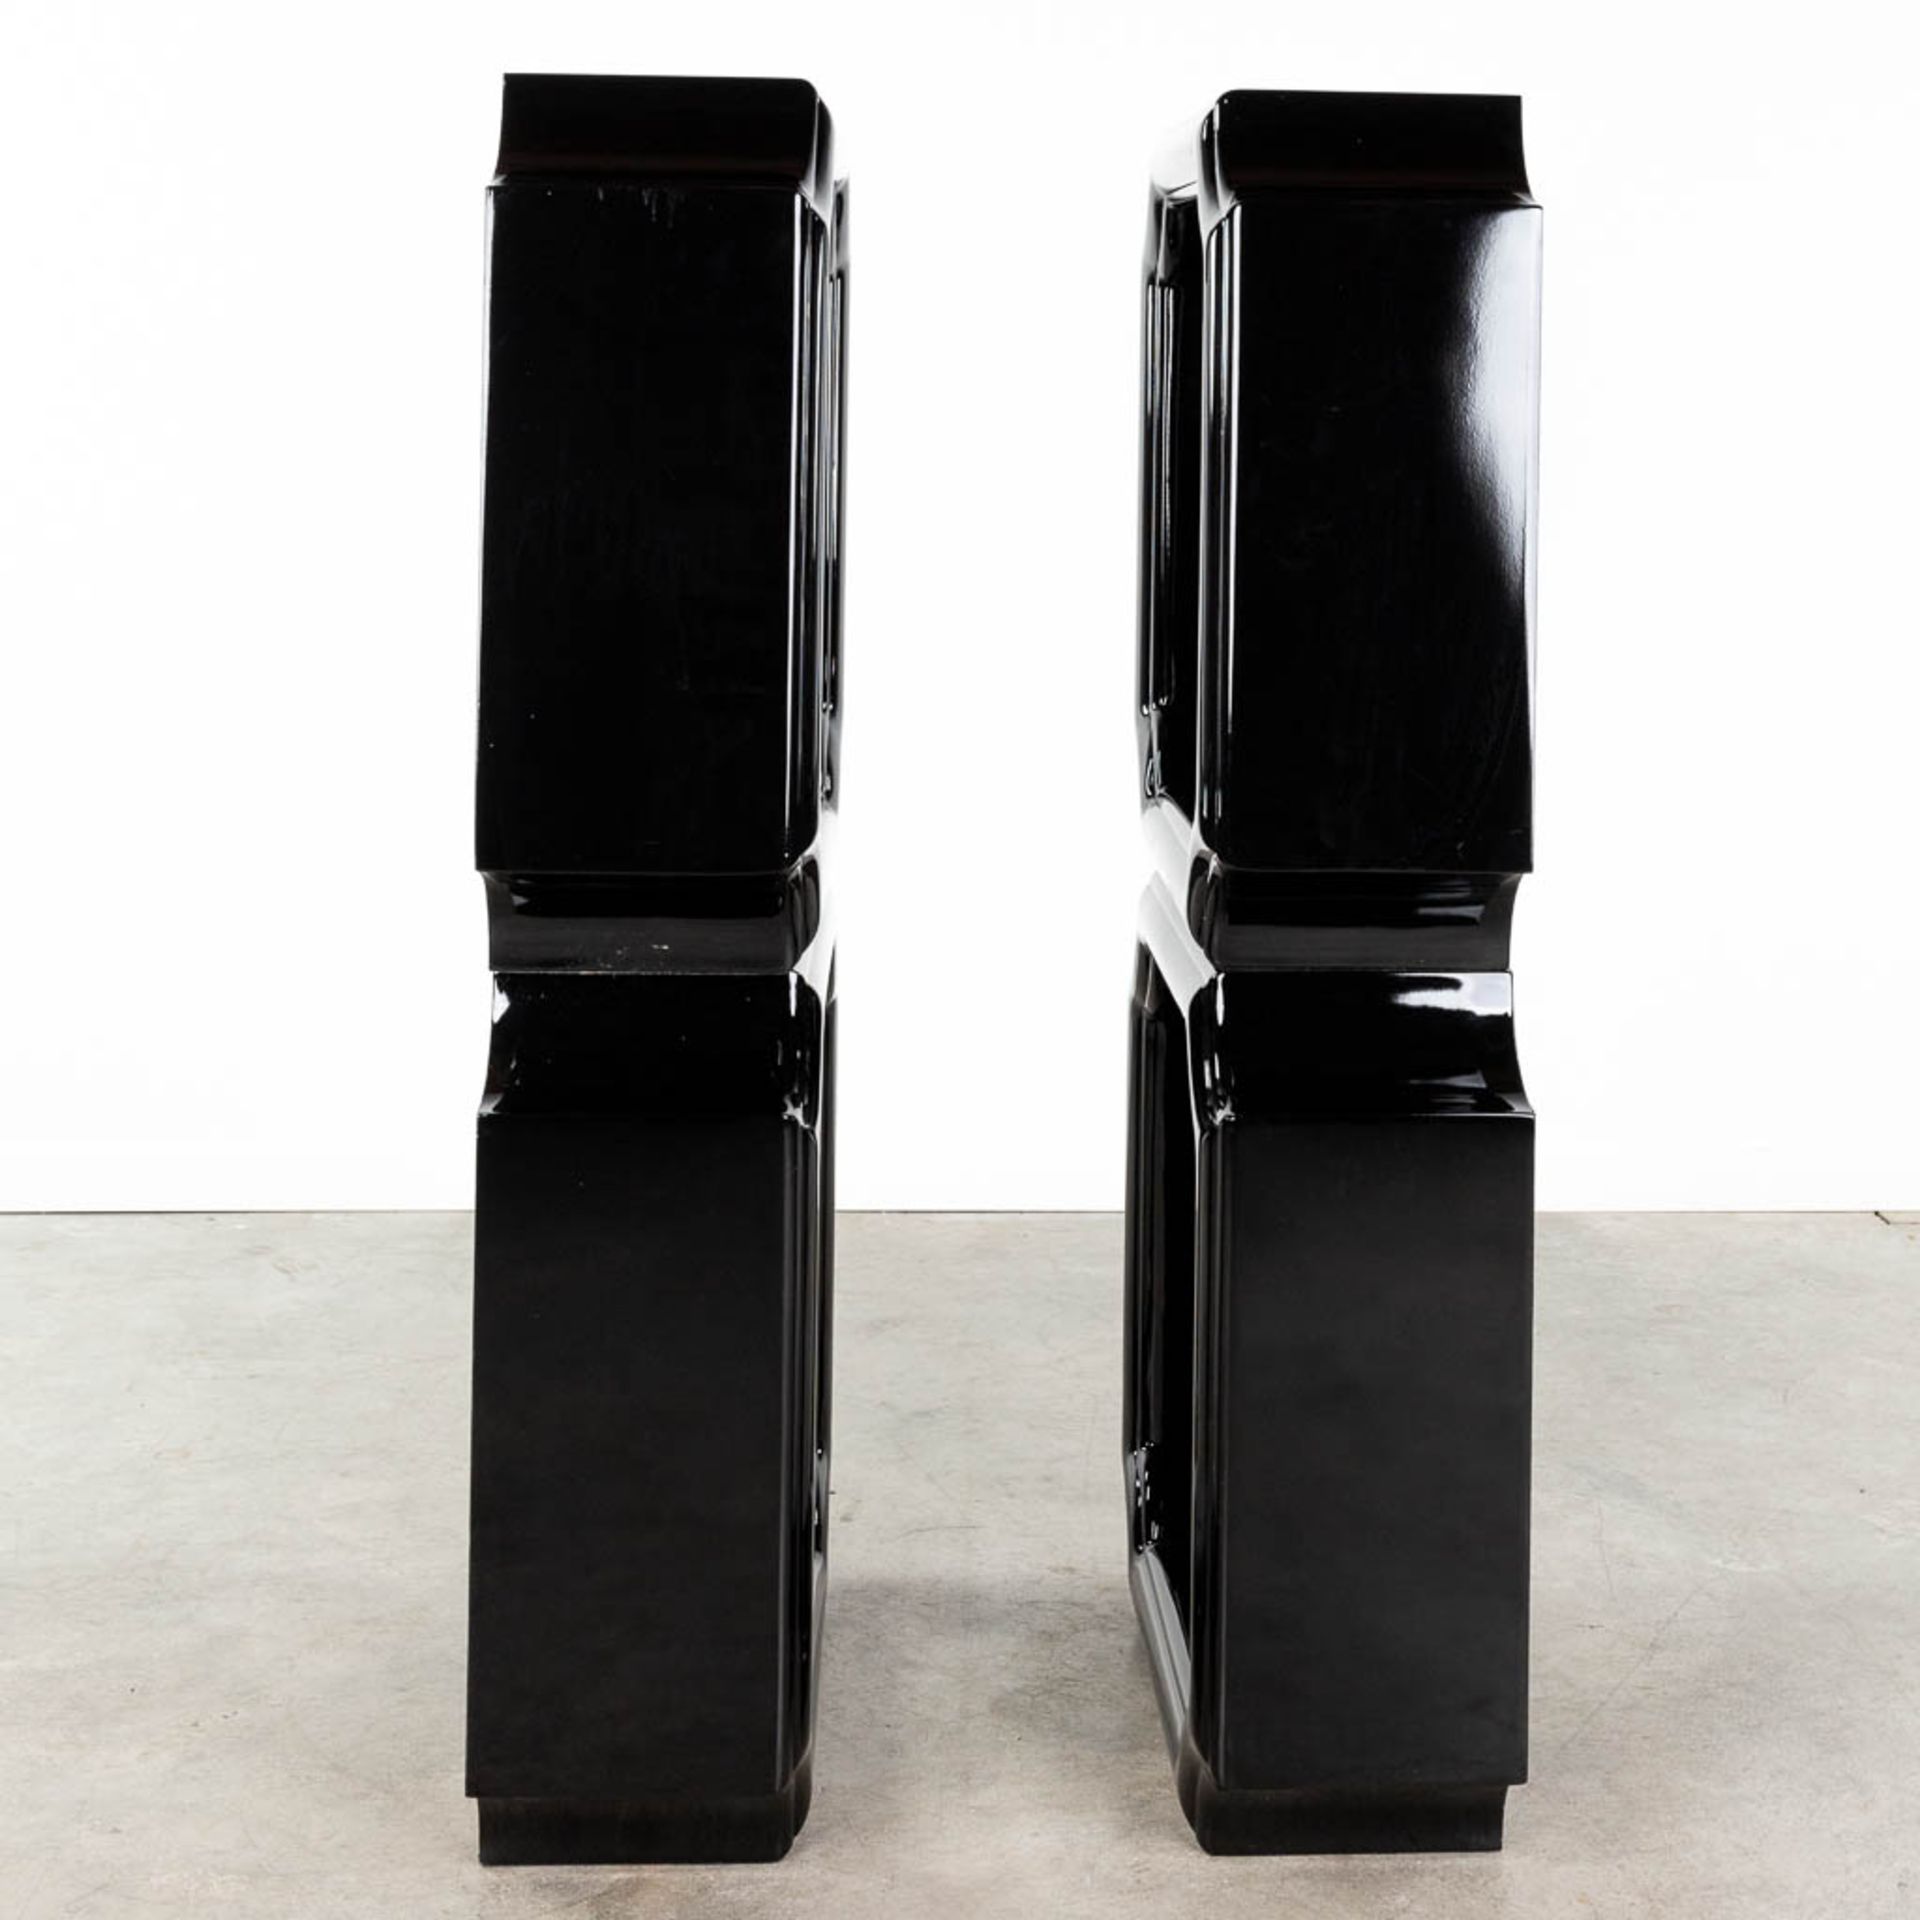 A set of 4 black lacquered elements, 20th C. (L: 61 x W: 61 x H: 22 cm) - Image 7 of 10